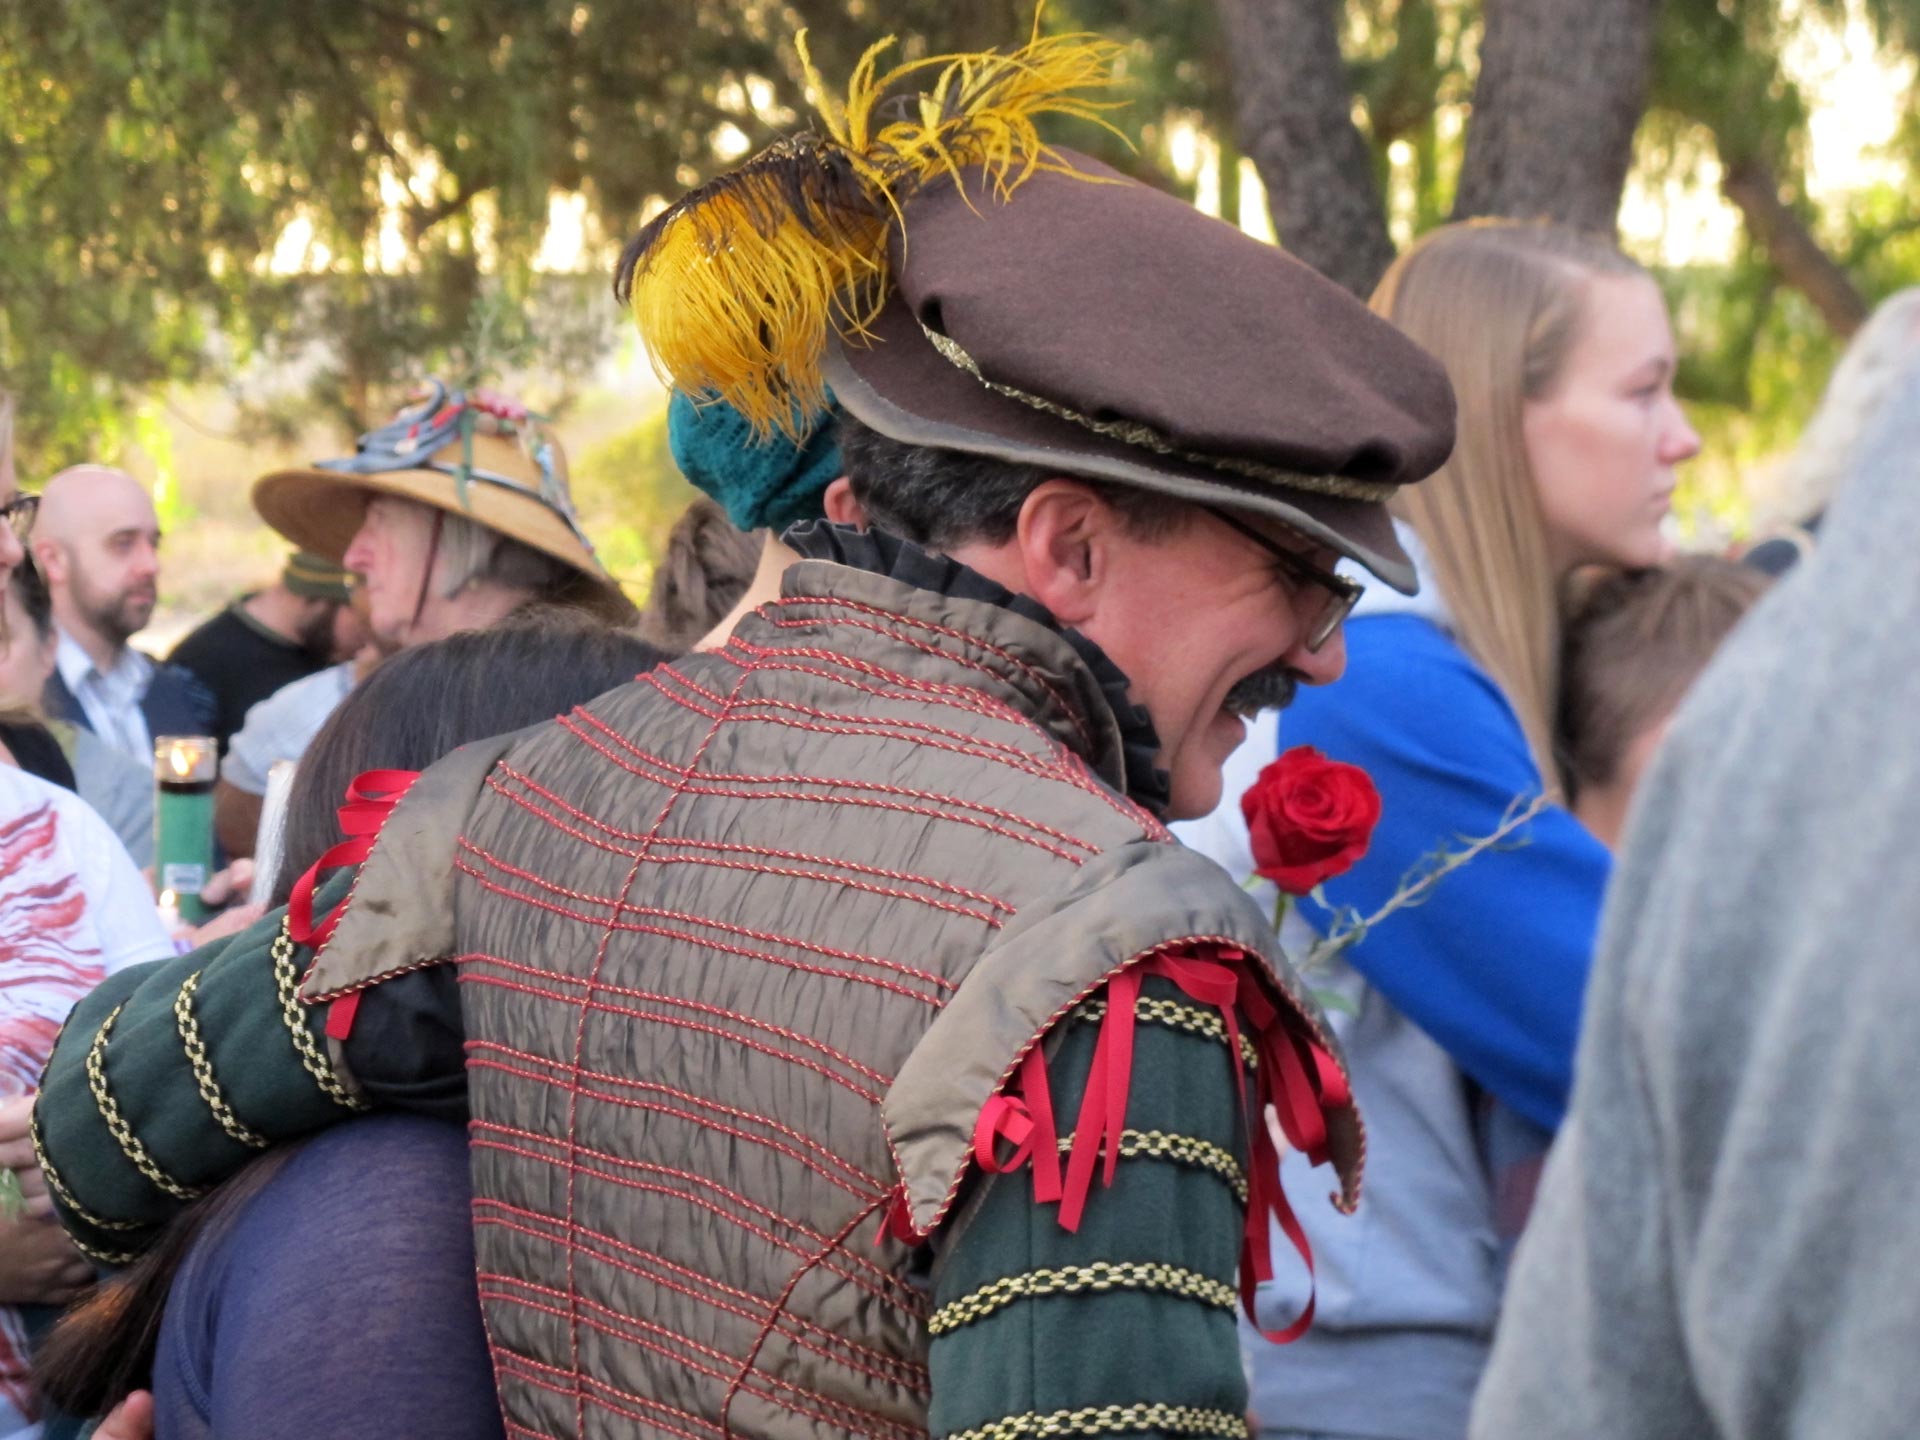 Some people showed up in costume to the Renaissance Pleasure Faire site in Irwindale to remember Larry Daniel Kaufman, a member of their community for more than a decade and a half.